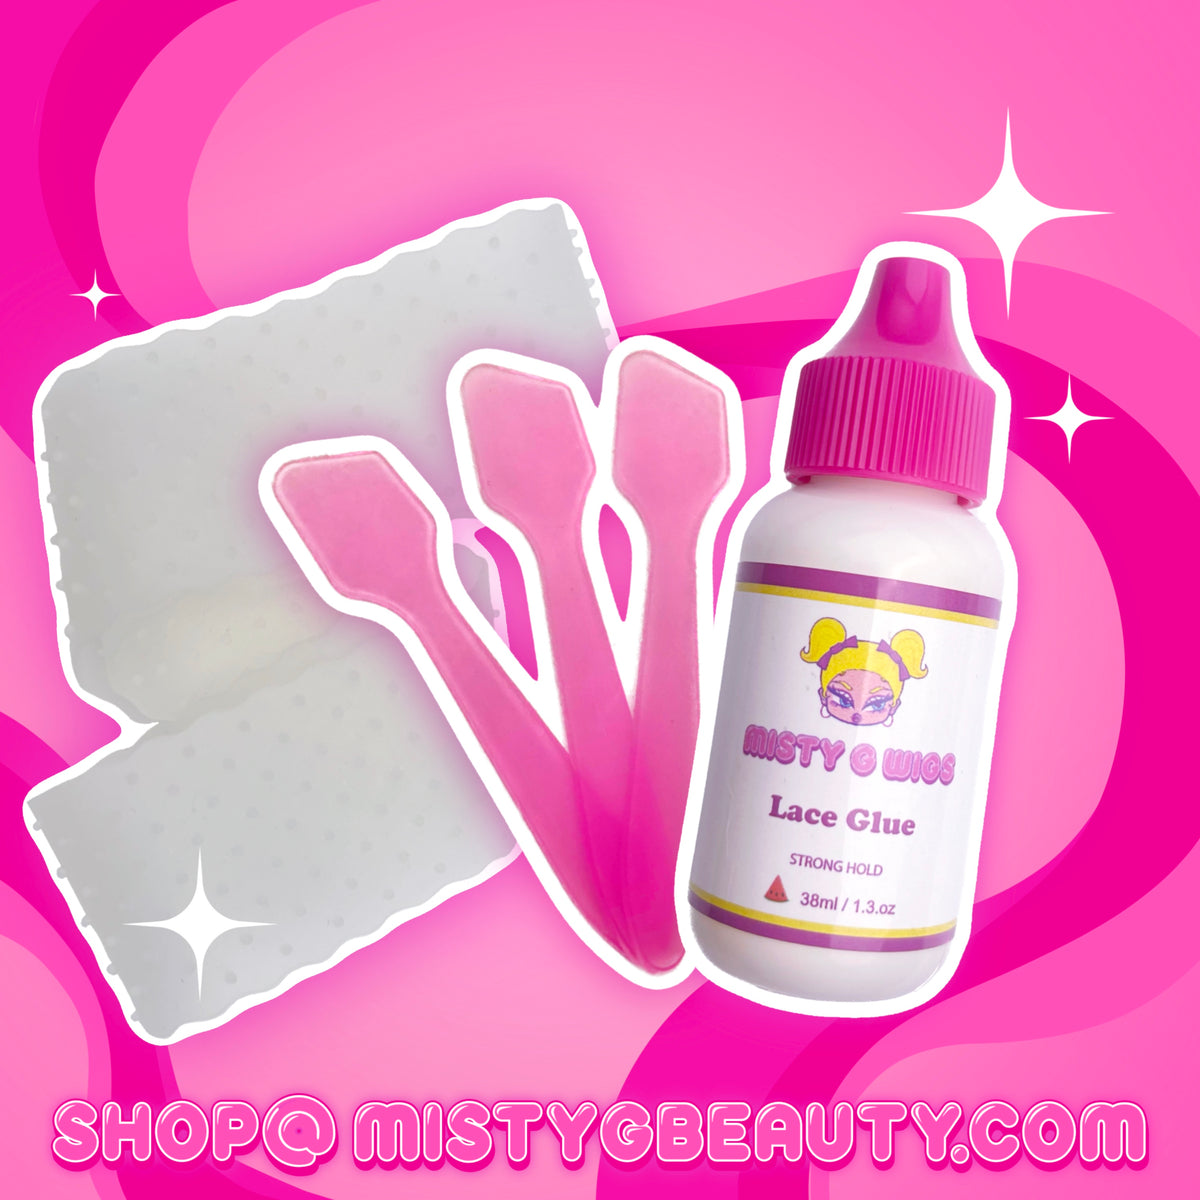 Quick Grip Silicone Headband and Lace Glue Bundle – Misty G Beauty